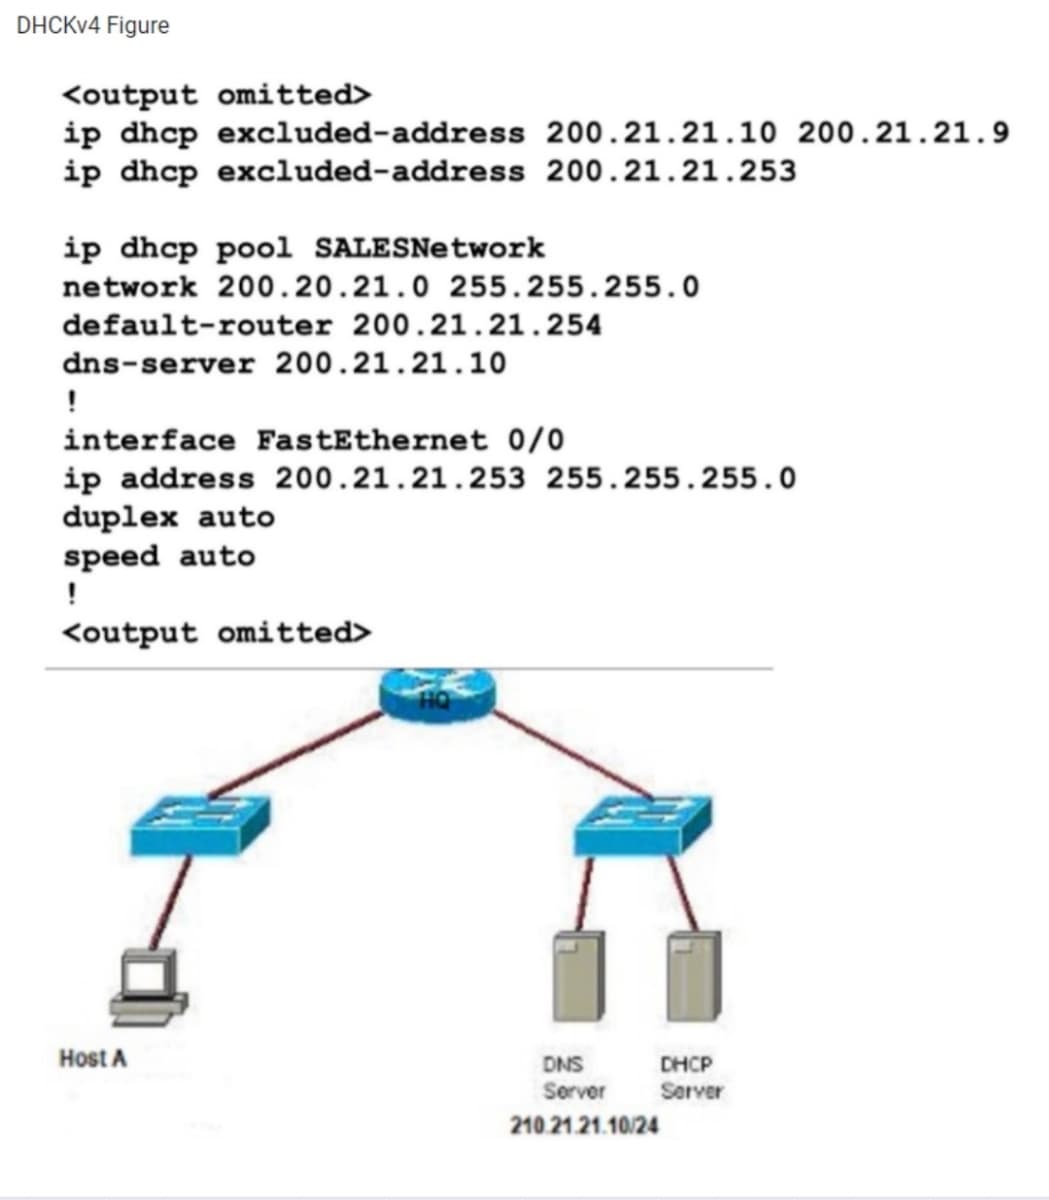 DHCKV4 Figure
<output omitted>
ip dhcp excluded-address 200.21.21.10 200.21.21.9
ip dhcp excluded-address 200.21.21.253
ip dhcp pool SALESNetwork
network 200.20.21.0 255.255.255.0
default-router 200.21.21.254
dns-server 200.21.21.10
!
interface FastEthernet 0/0
ip address 200.21.21.253 255.255.255.0
duplex auto
speed auto
!
<output omitted>
Host A
DNS
DHCP
Server Server
210.21.21.10/24